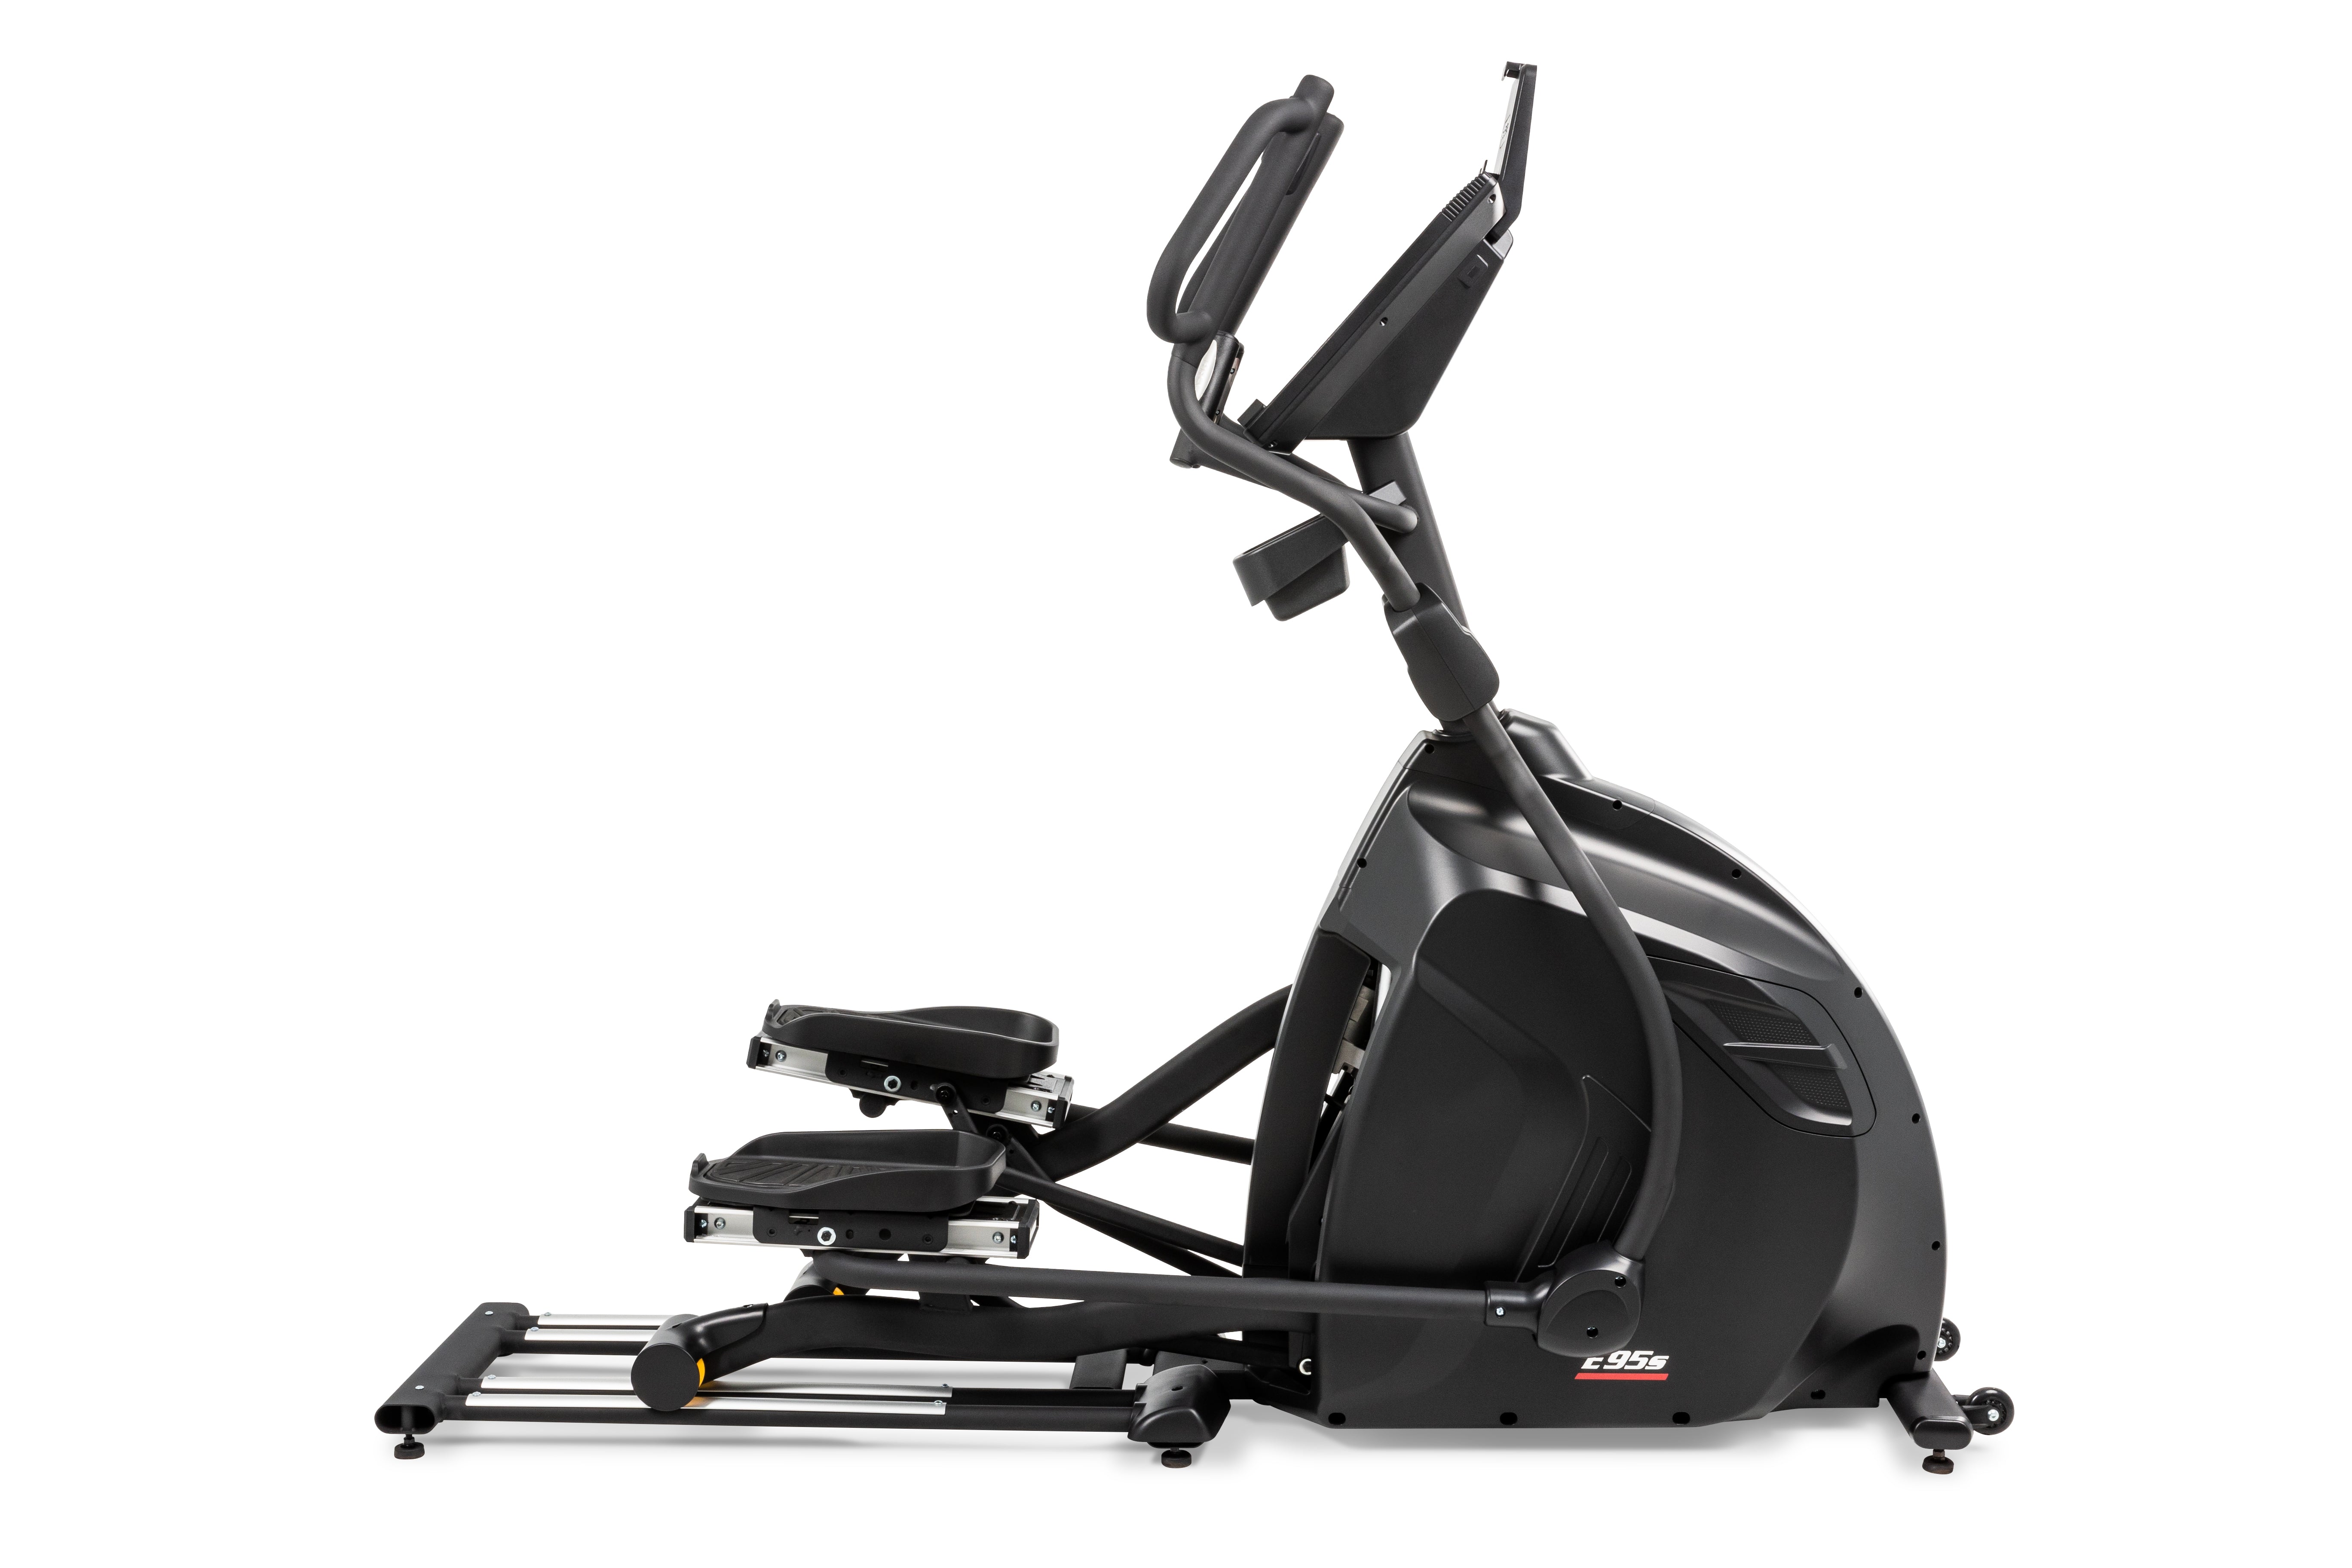 Side profile of the Sole E95S elliptical machine showcasing its sleek black design, adjustable foot pedals, curved handlebars, a prominent digital display panel, and a sturdy base with a yellow folding release lever and wheels for mobility.